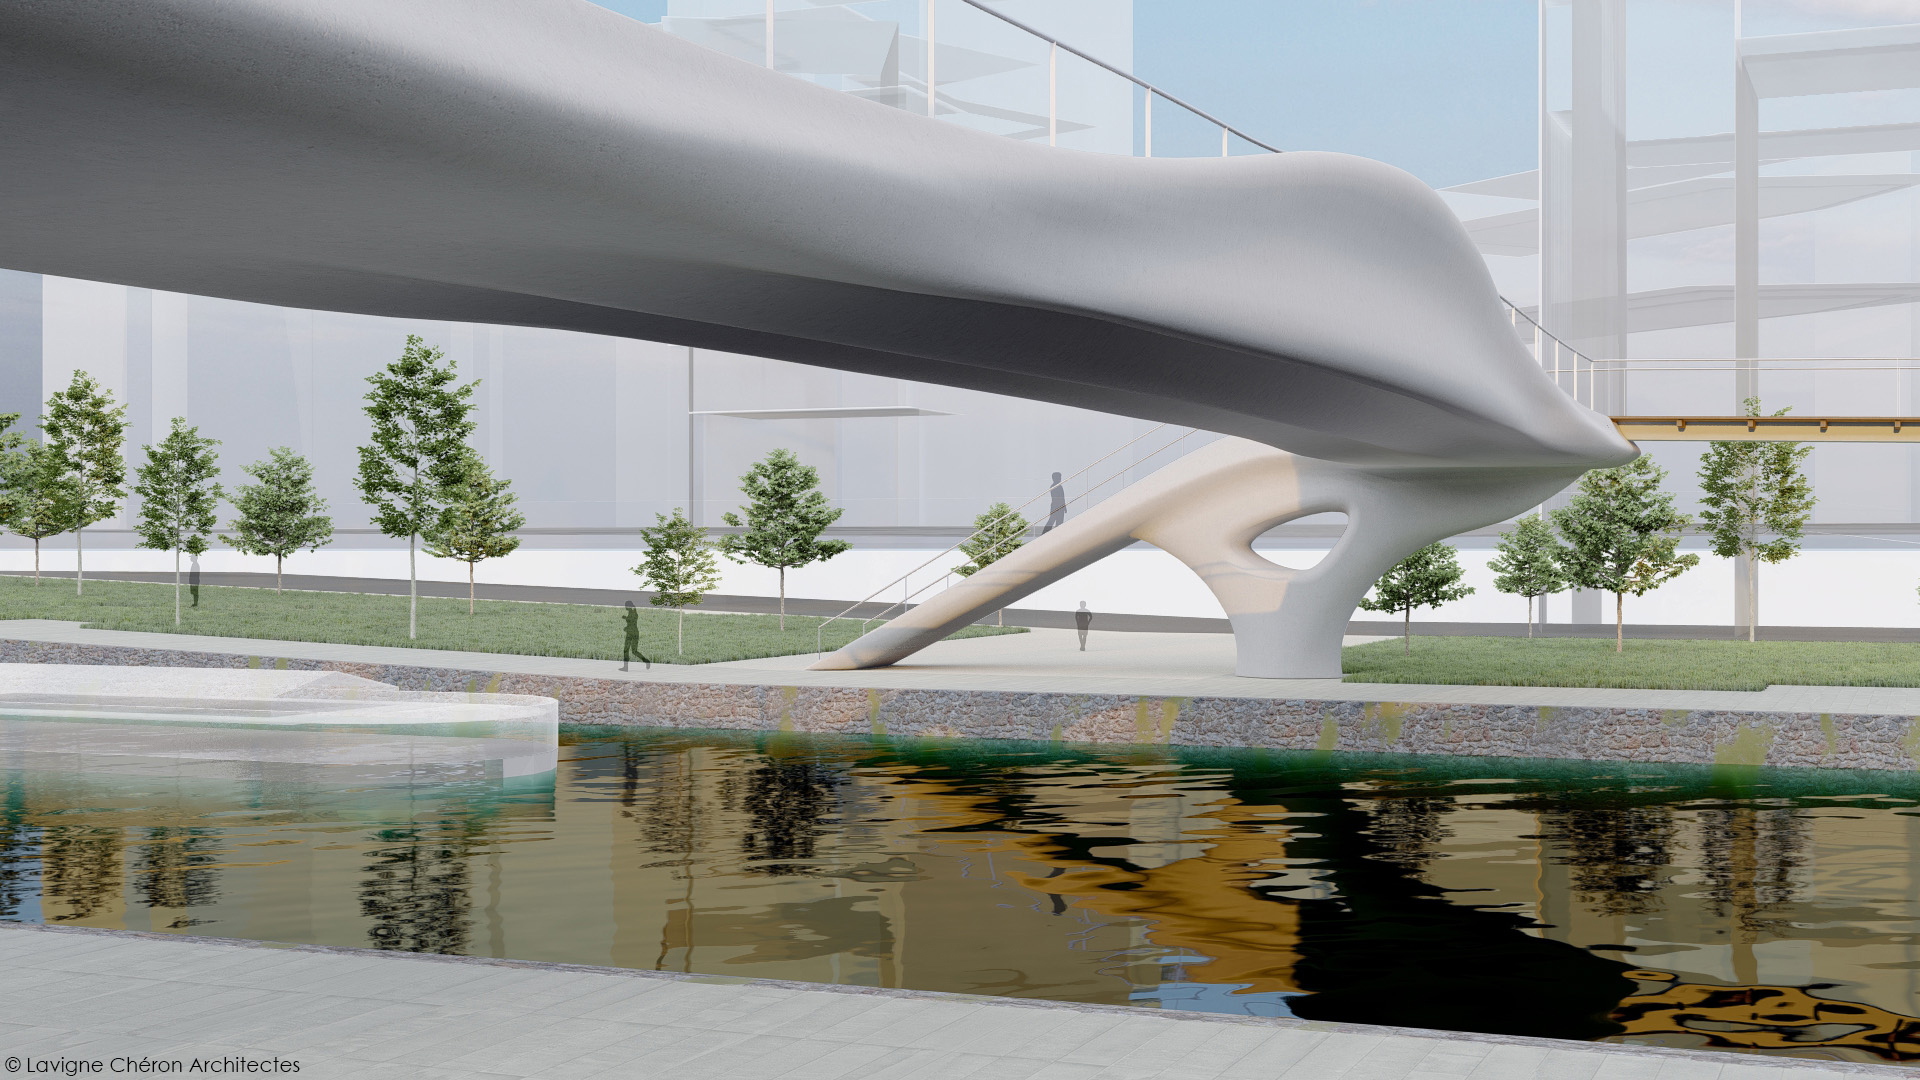 the bridge will be constructed in anticipation of the 2024 Paris Olympic Games. Image via XtreeE.